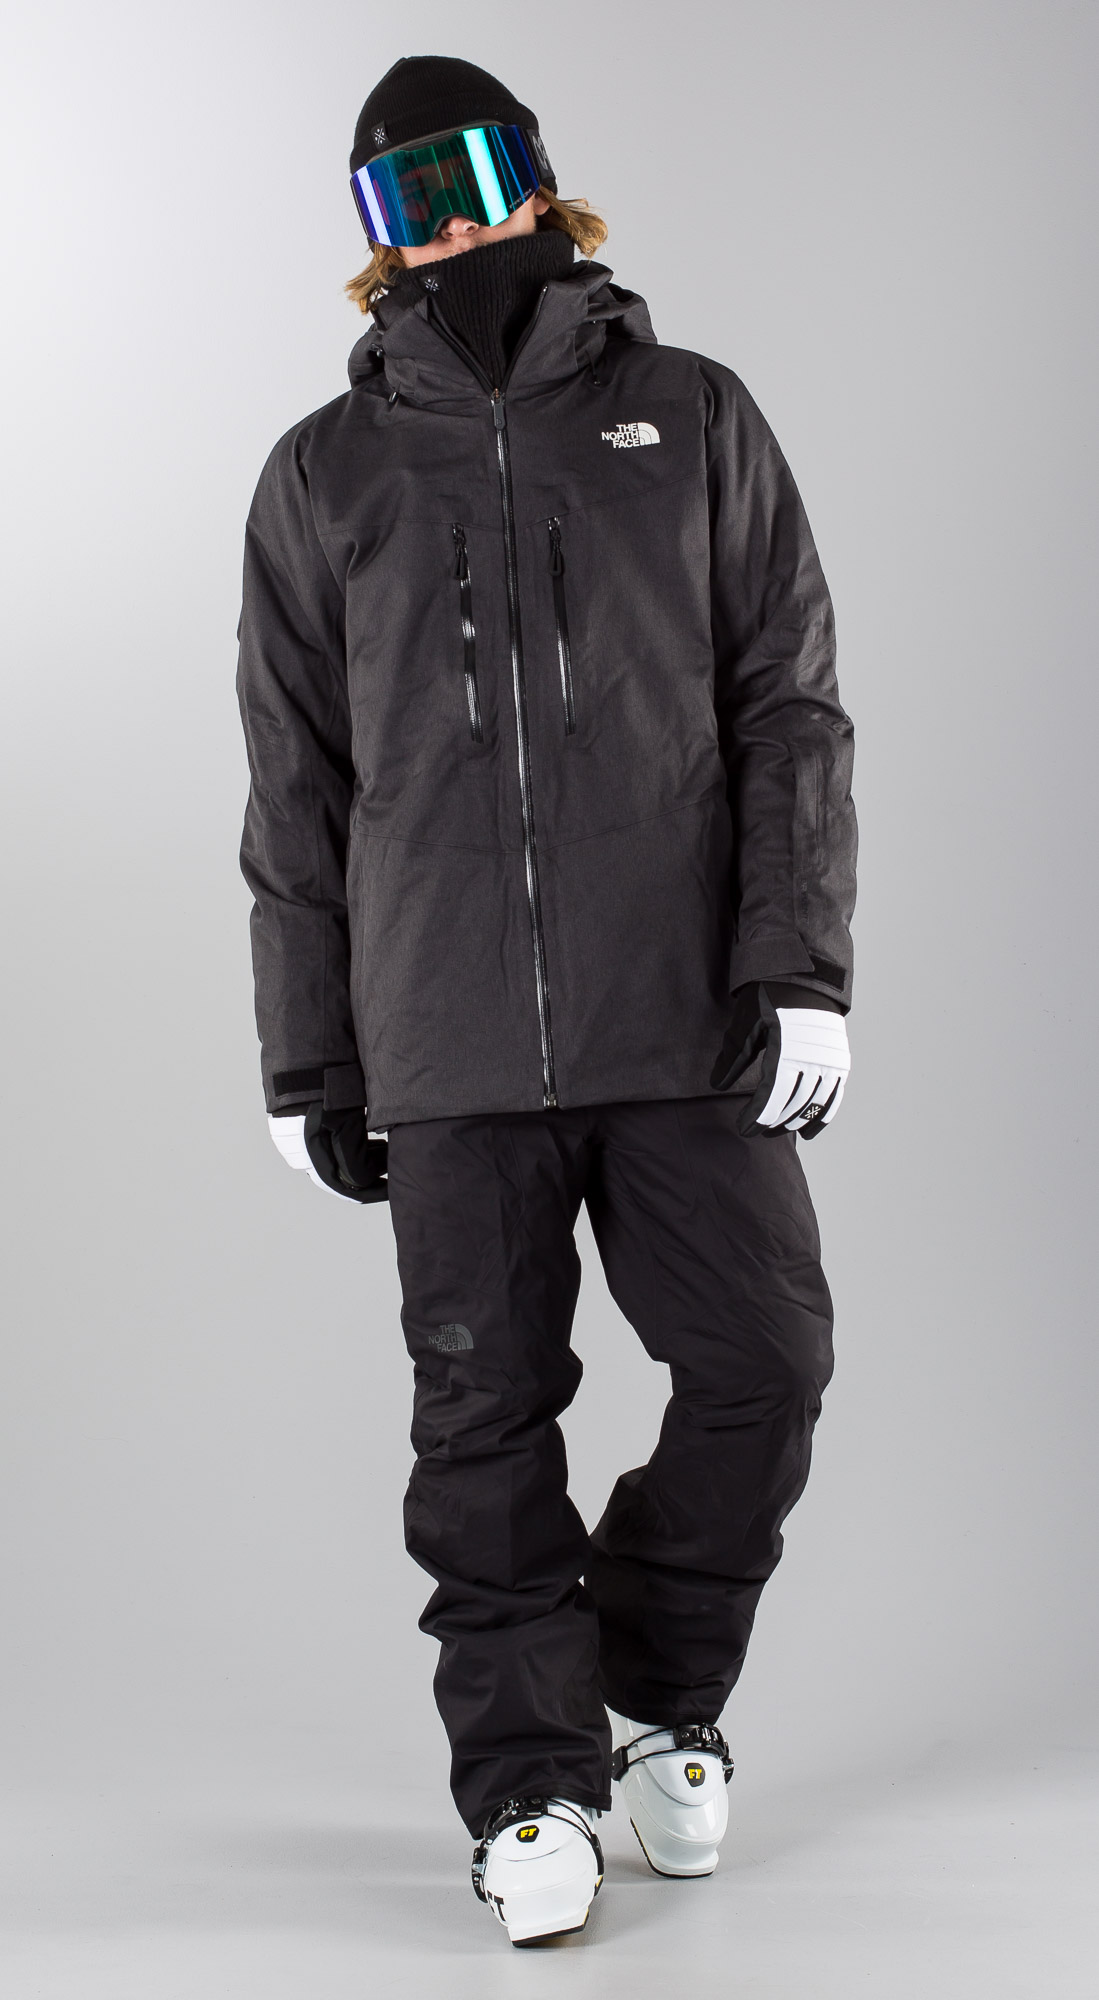 ski wear north face Online Shopping for 